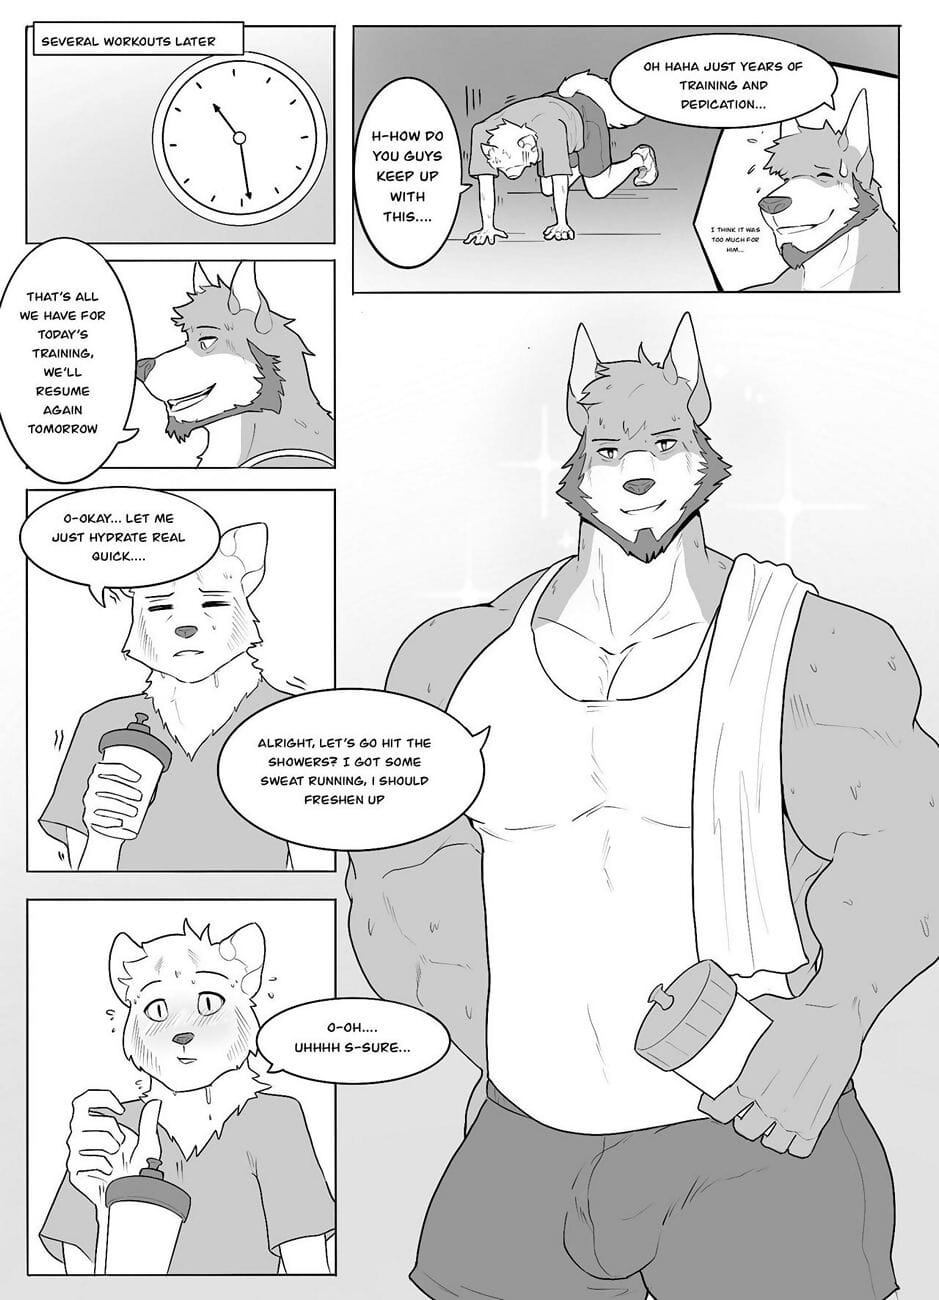 Our Differences - part 2 page 1